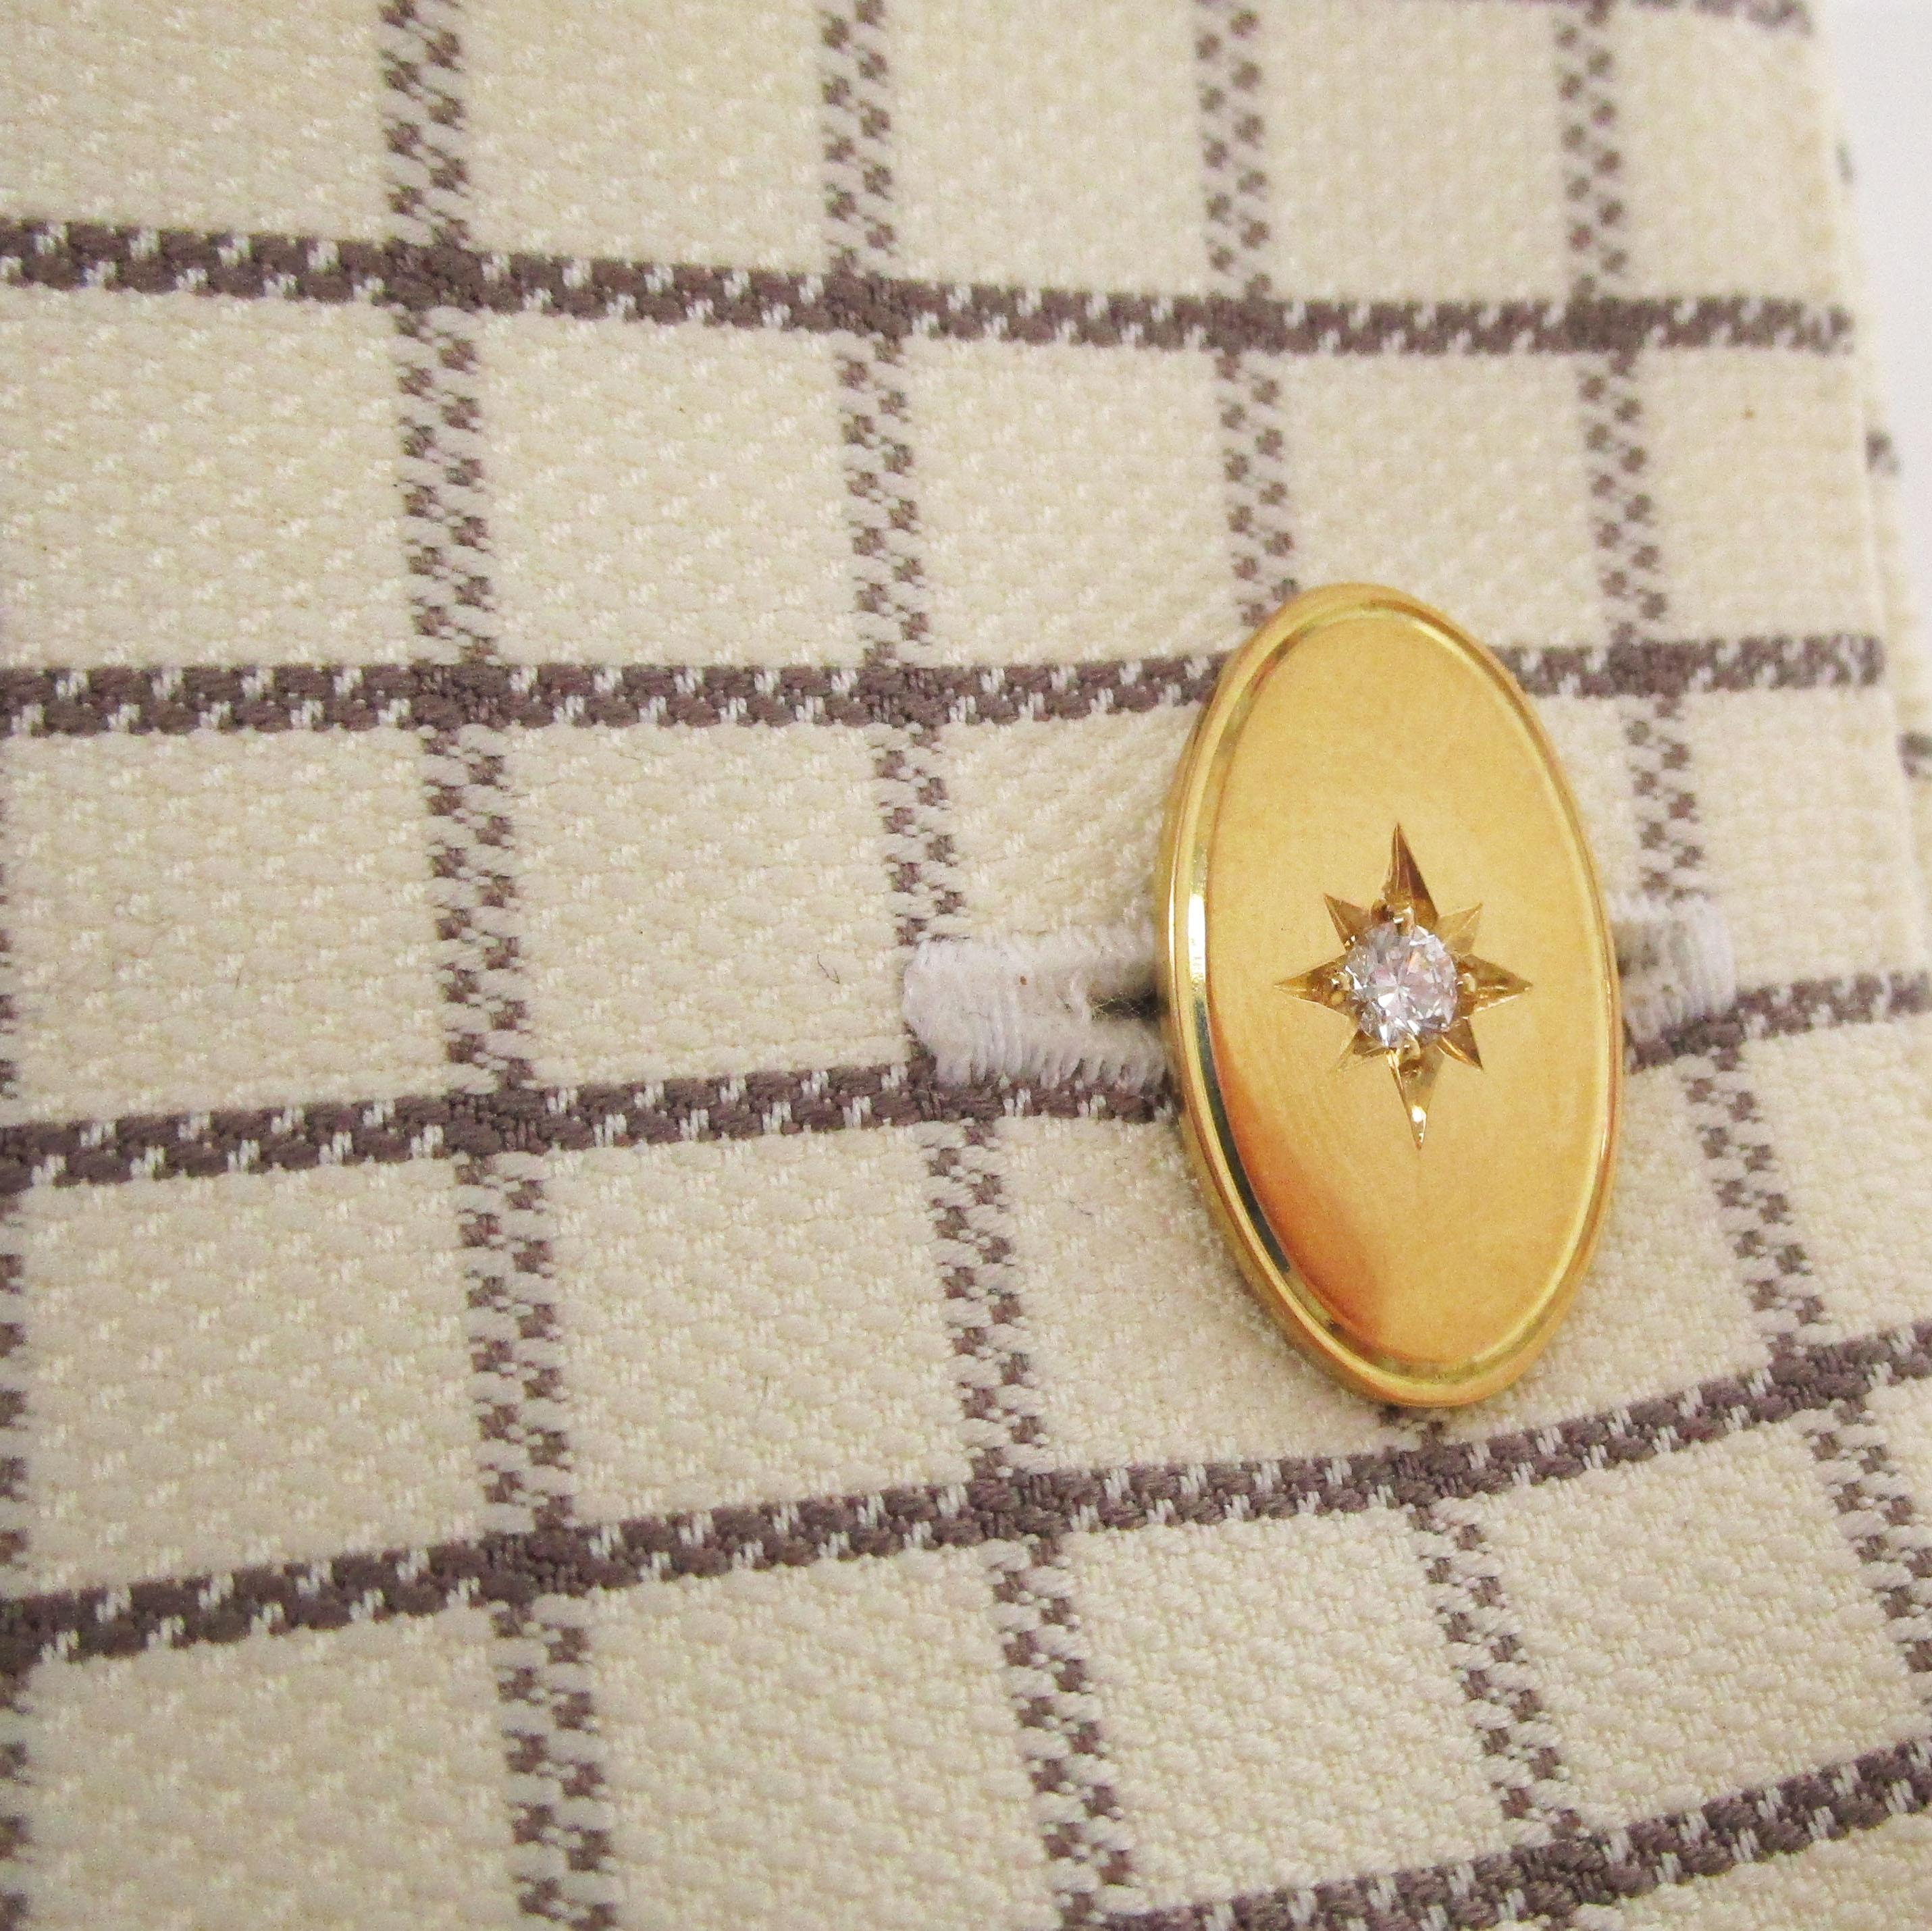 18 Karat Yellow Gold Star Set Diamond Oval Cufflinks In Excellent Condition For Sale In Lexington, KY